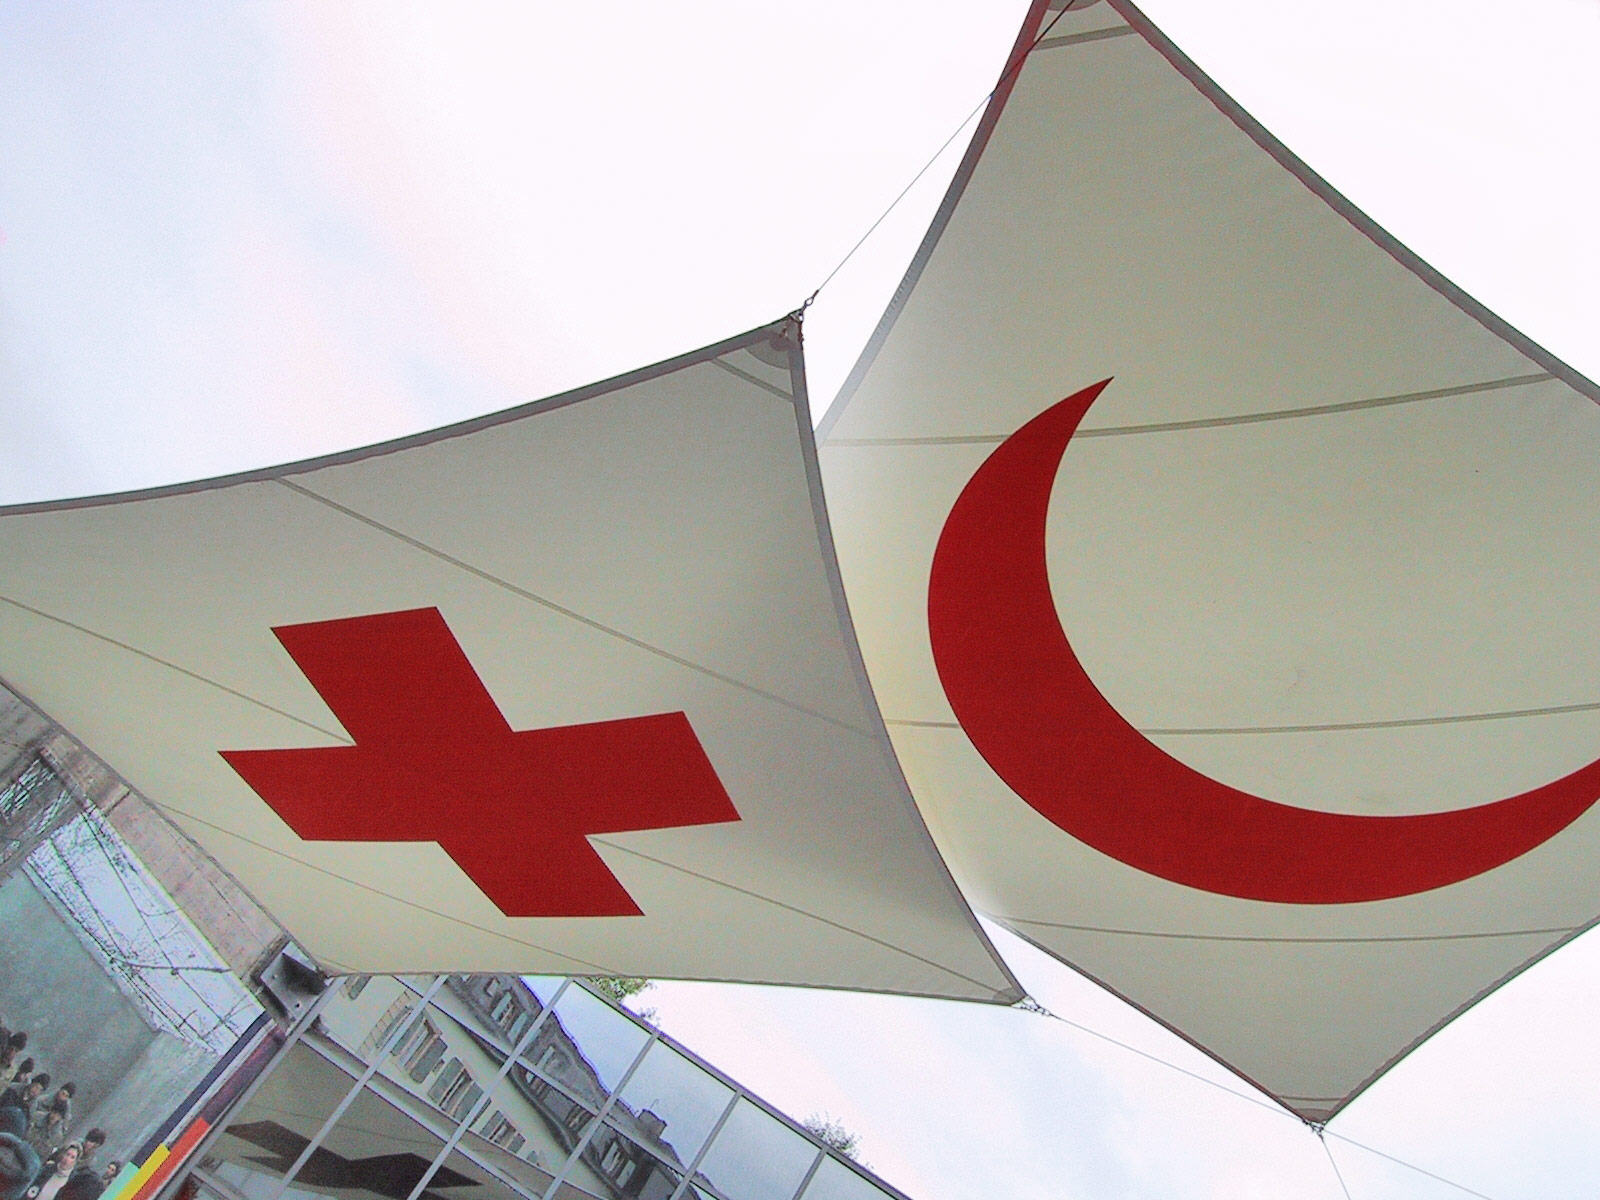 Red Cross and Red Crescent logos